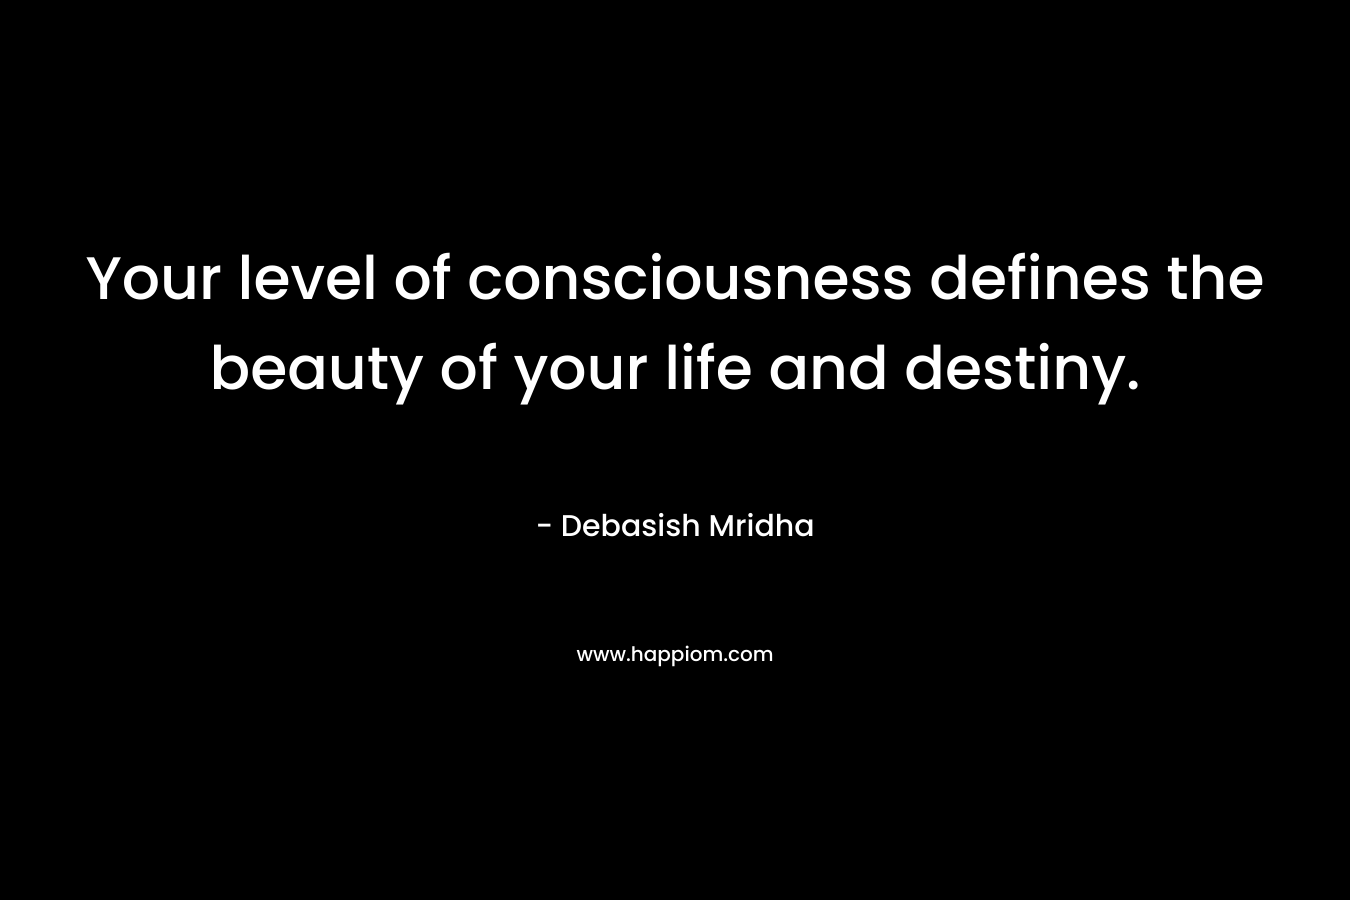 Your level of consciousness defines the beauty of your life and destiny.